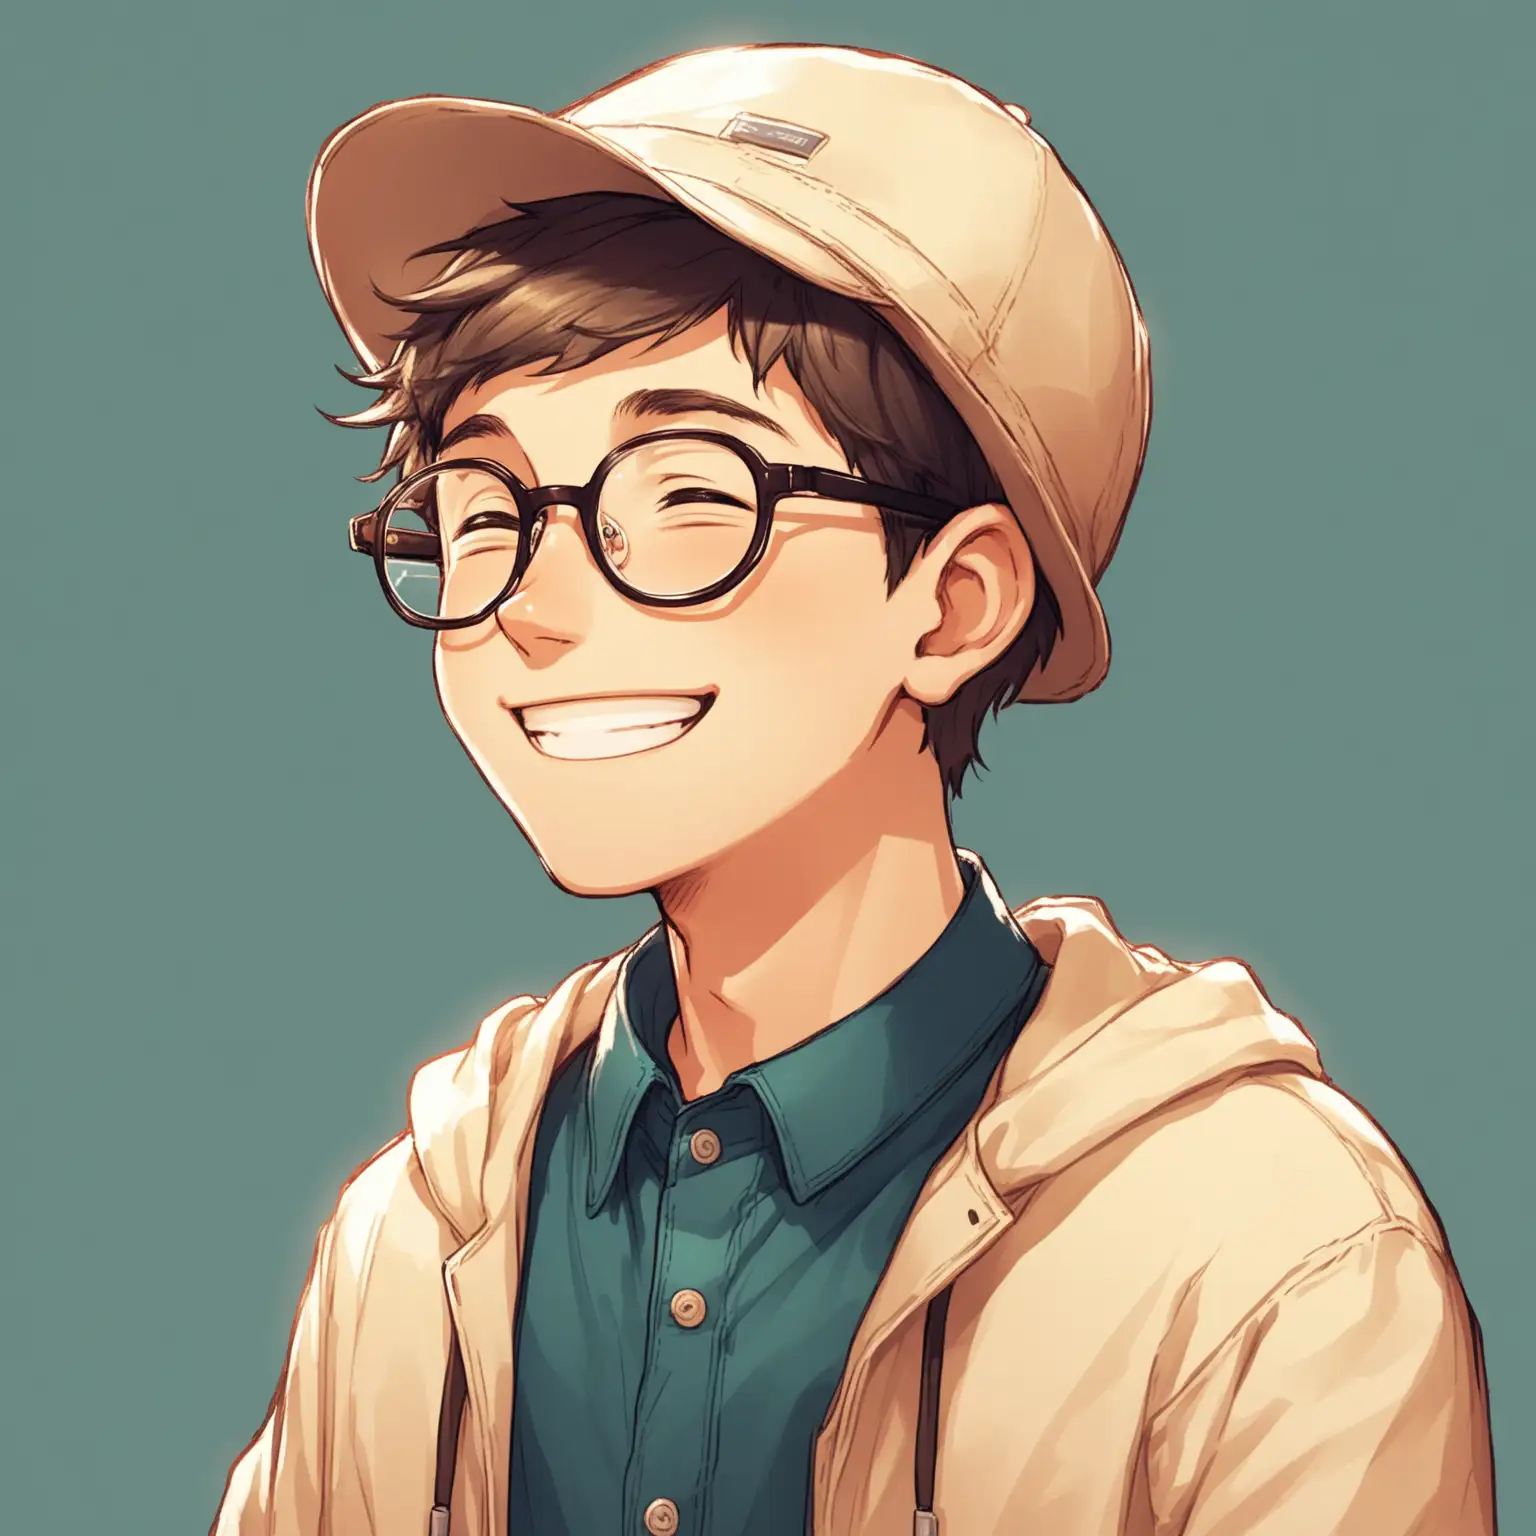 Cheerful-Boy-Wearing-Glasses-and-Programmer-Hat-Smiling-Profile